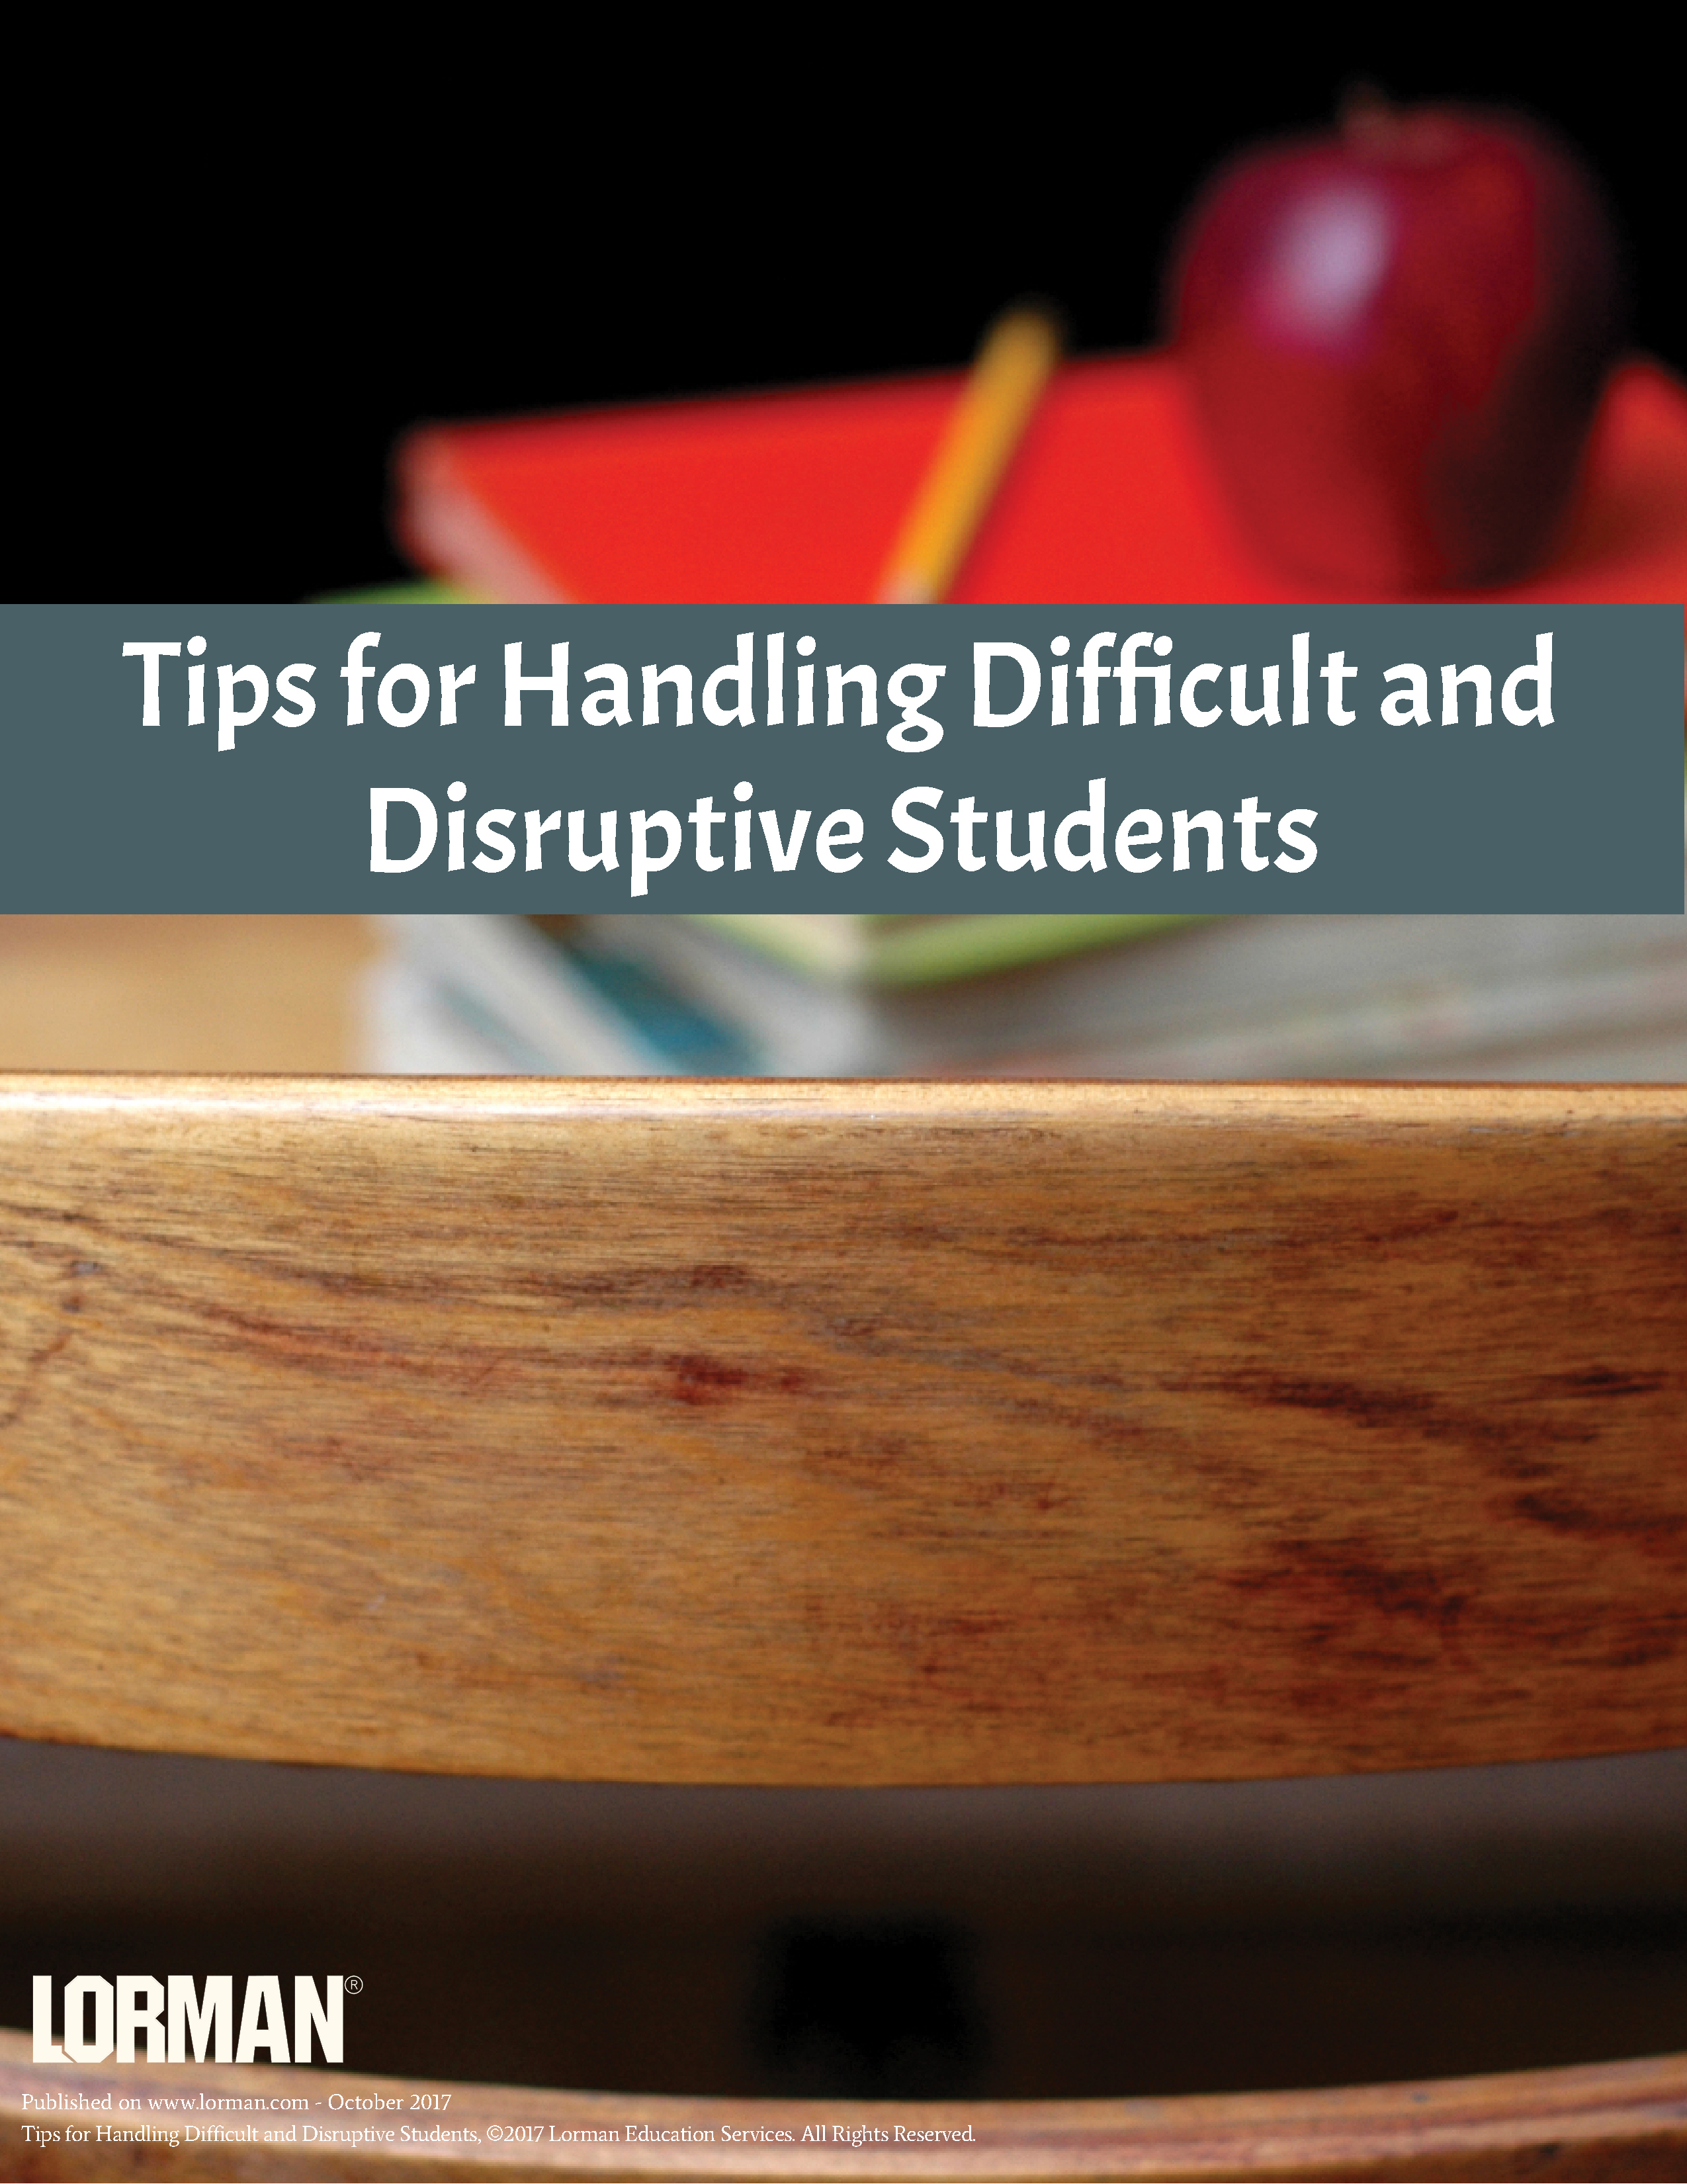 Tips for Handling Difficult and Disruptive Students